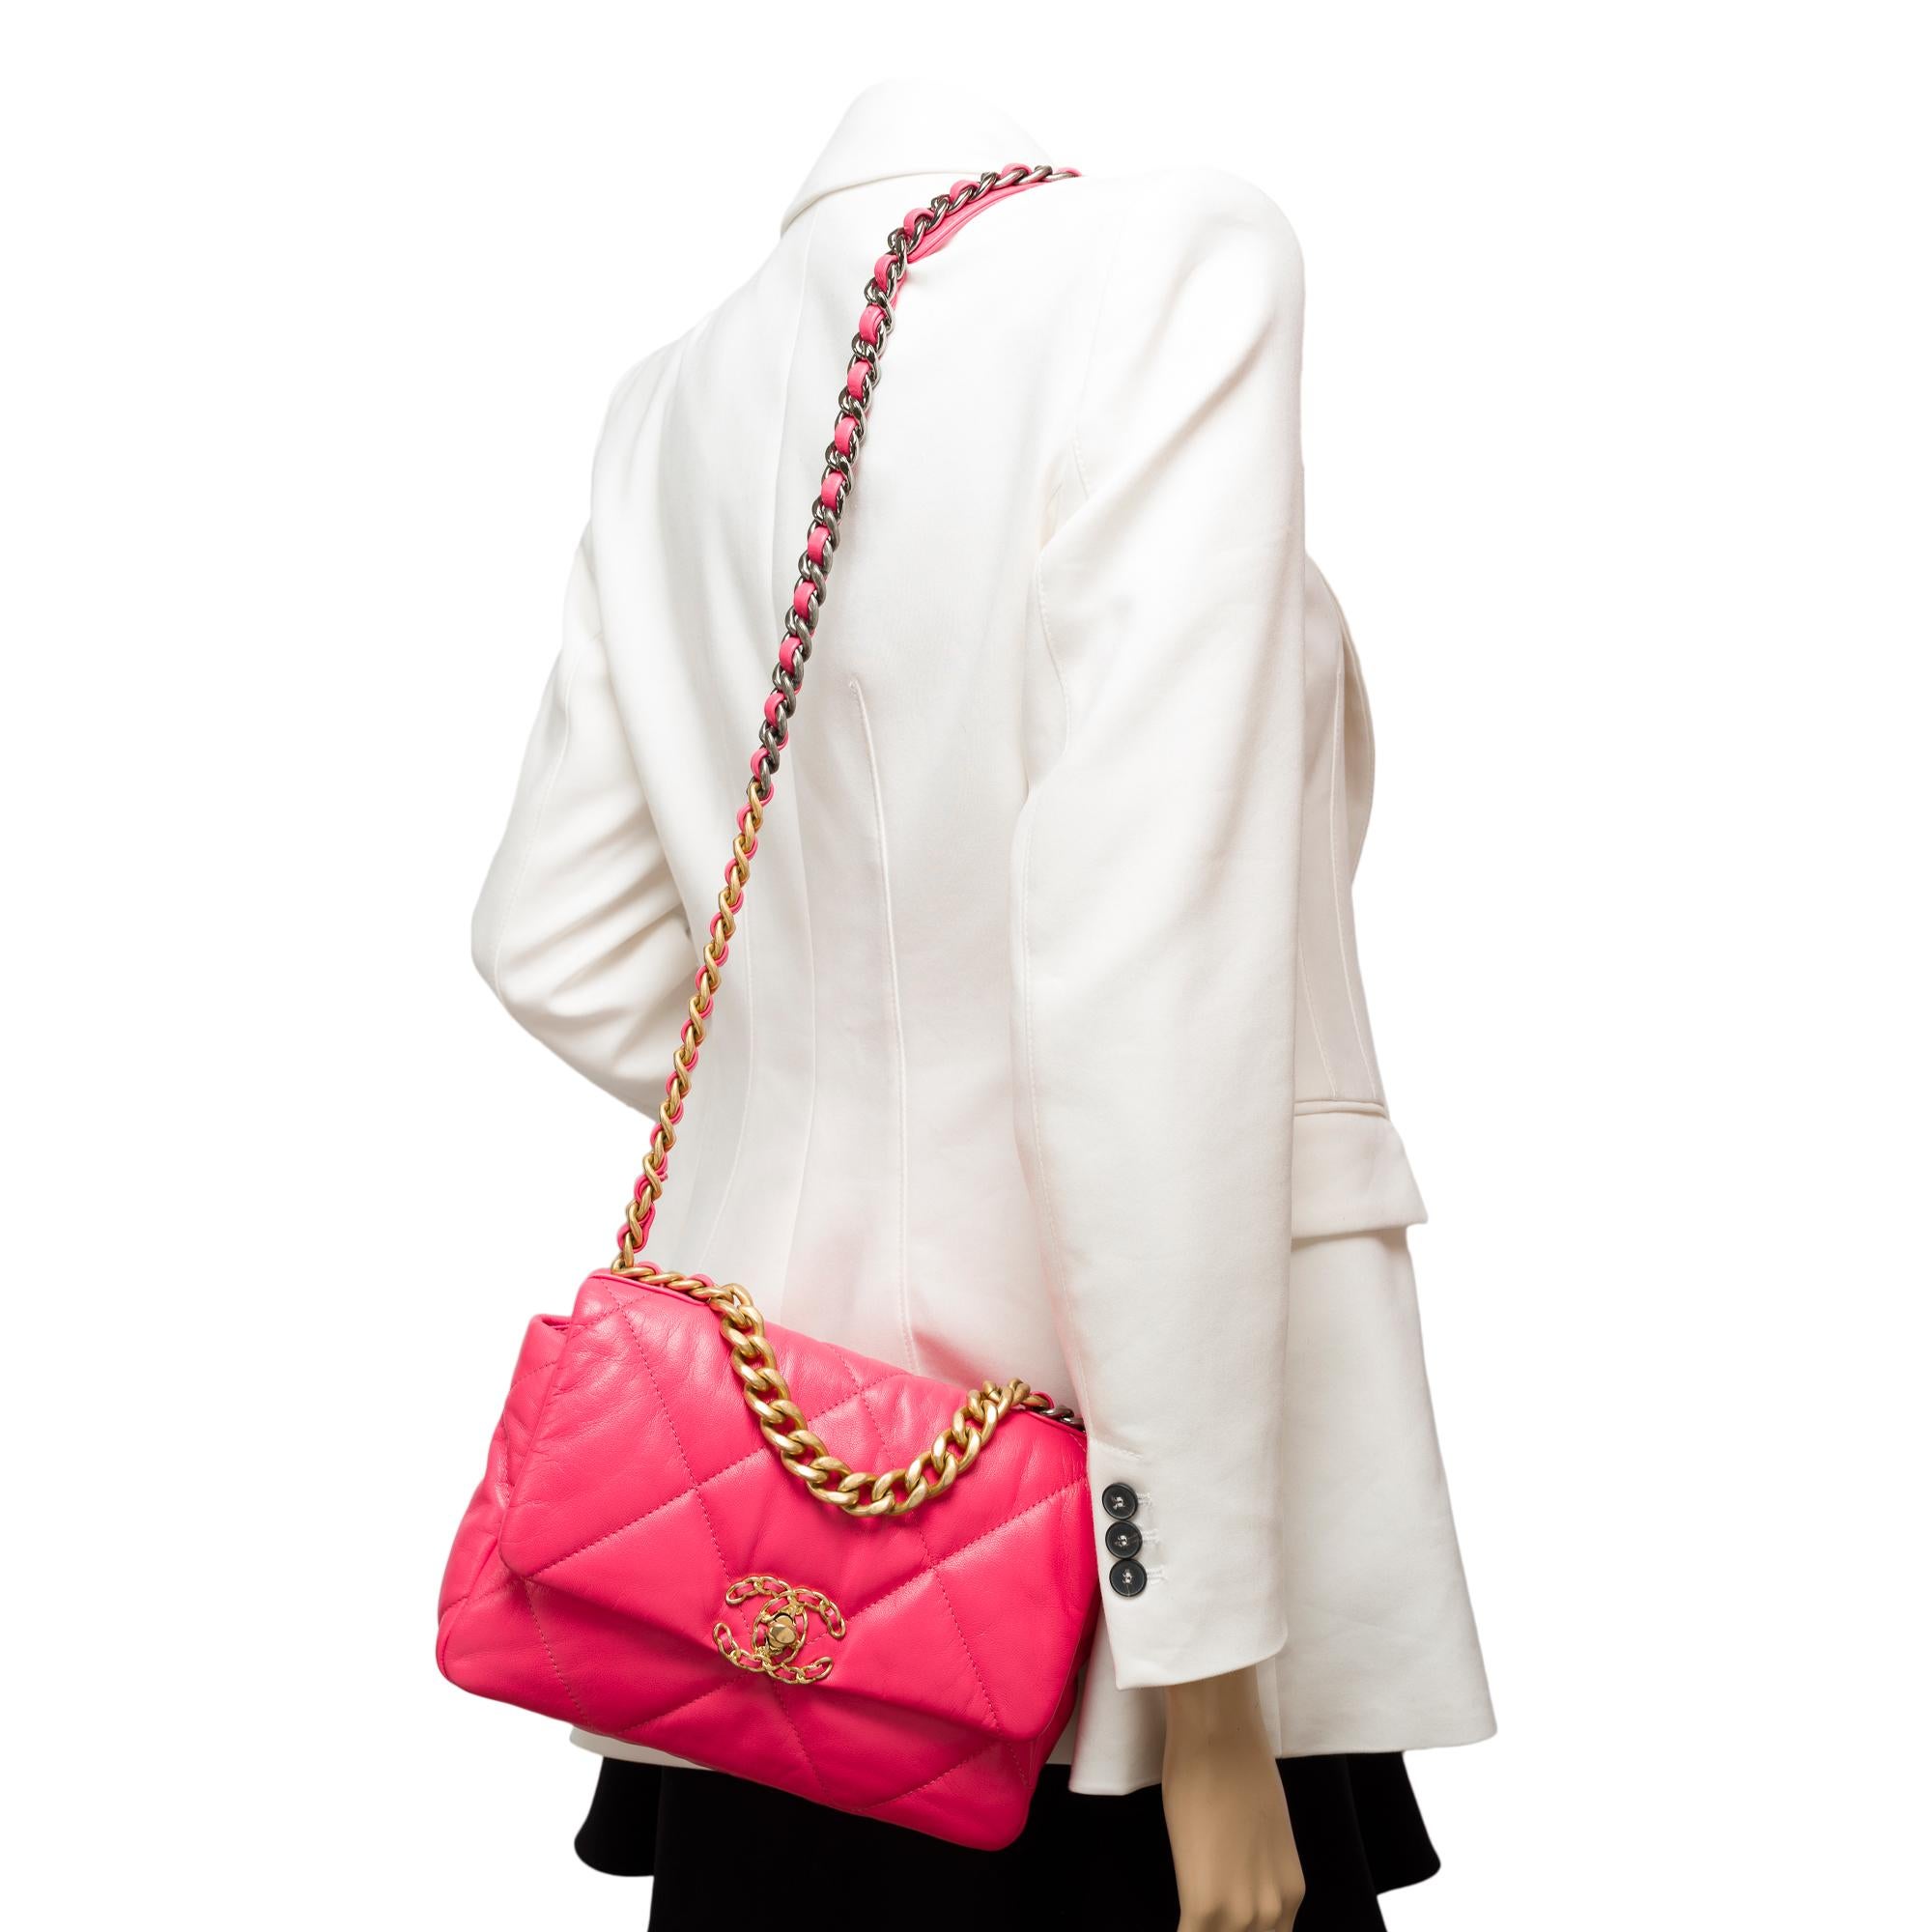 Stunning Chanel 19 shoulder bag in Pink quilted leather , Matt gold and SHW 10